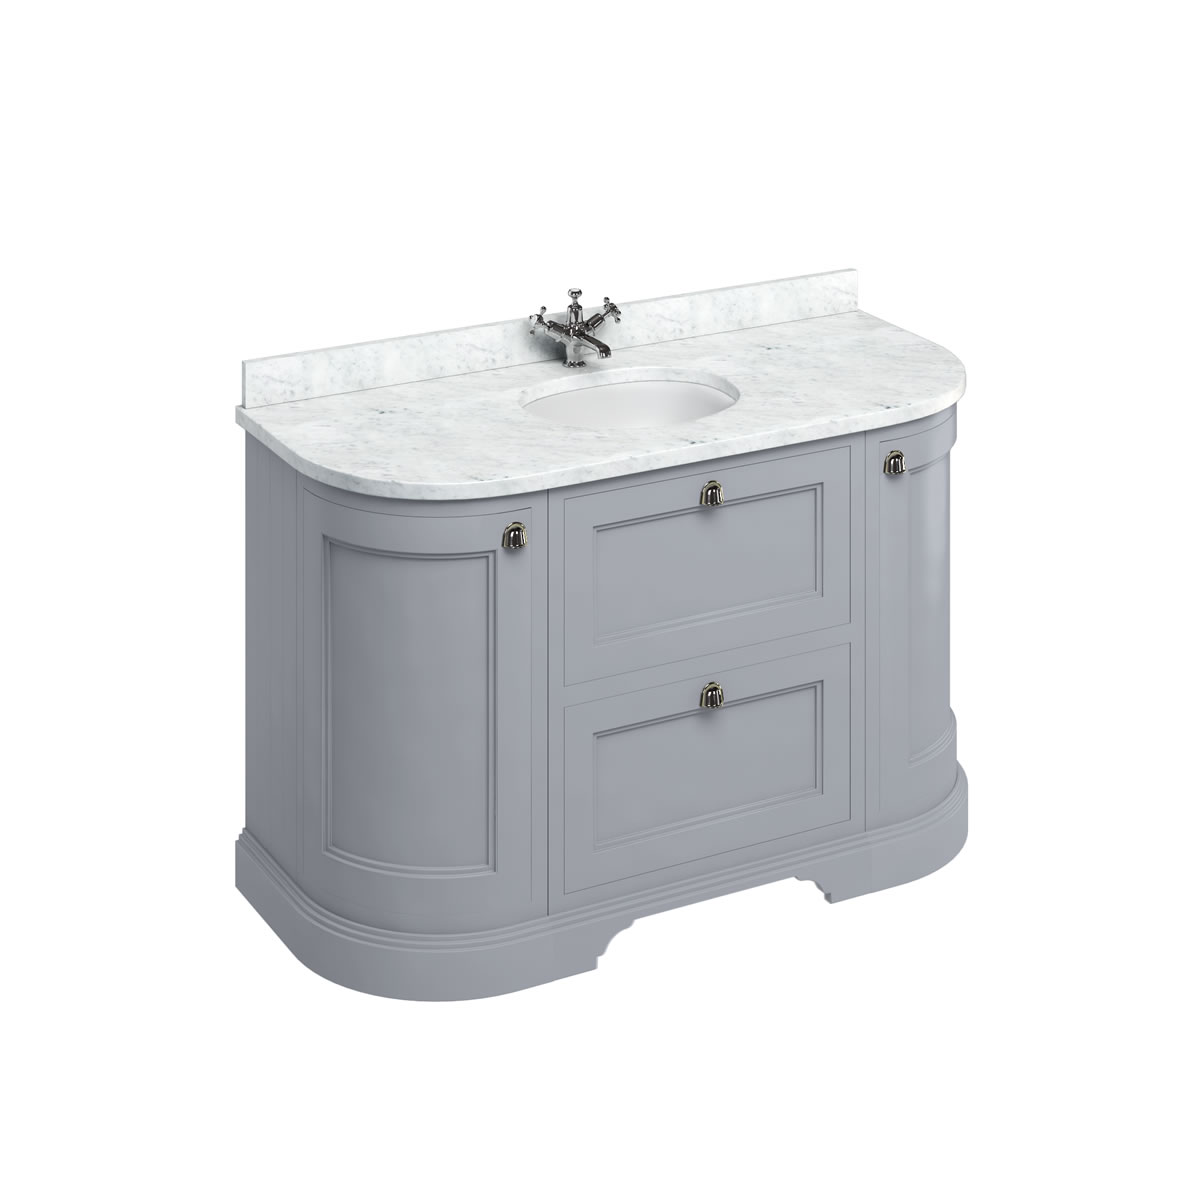 Freestanding 134 Curved Vanity Unit with drawers - Classic Grey and Minerva Carrara white worktop with integrated white basin 